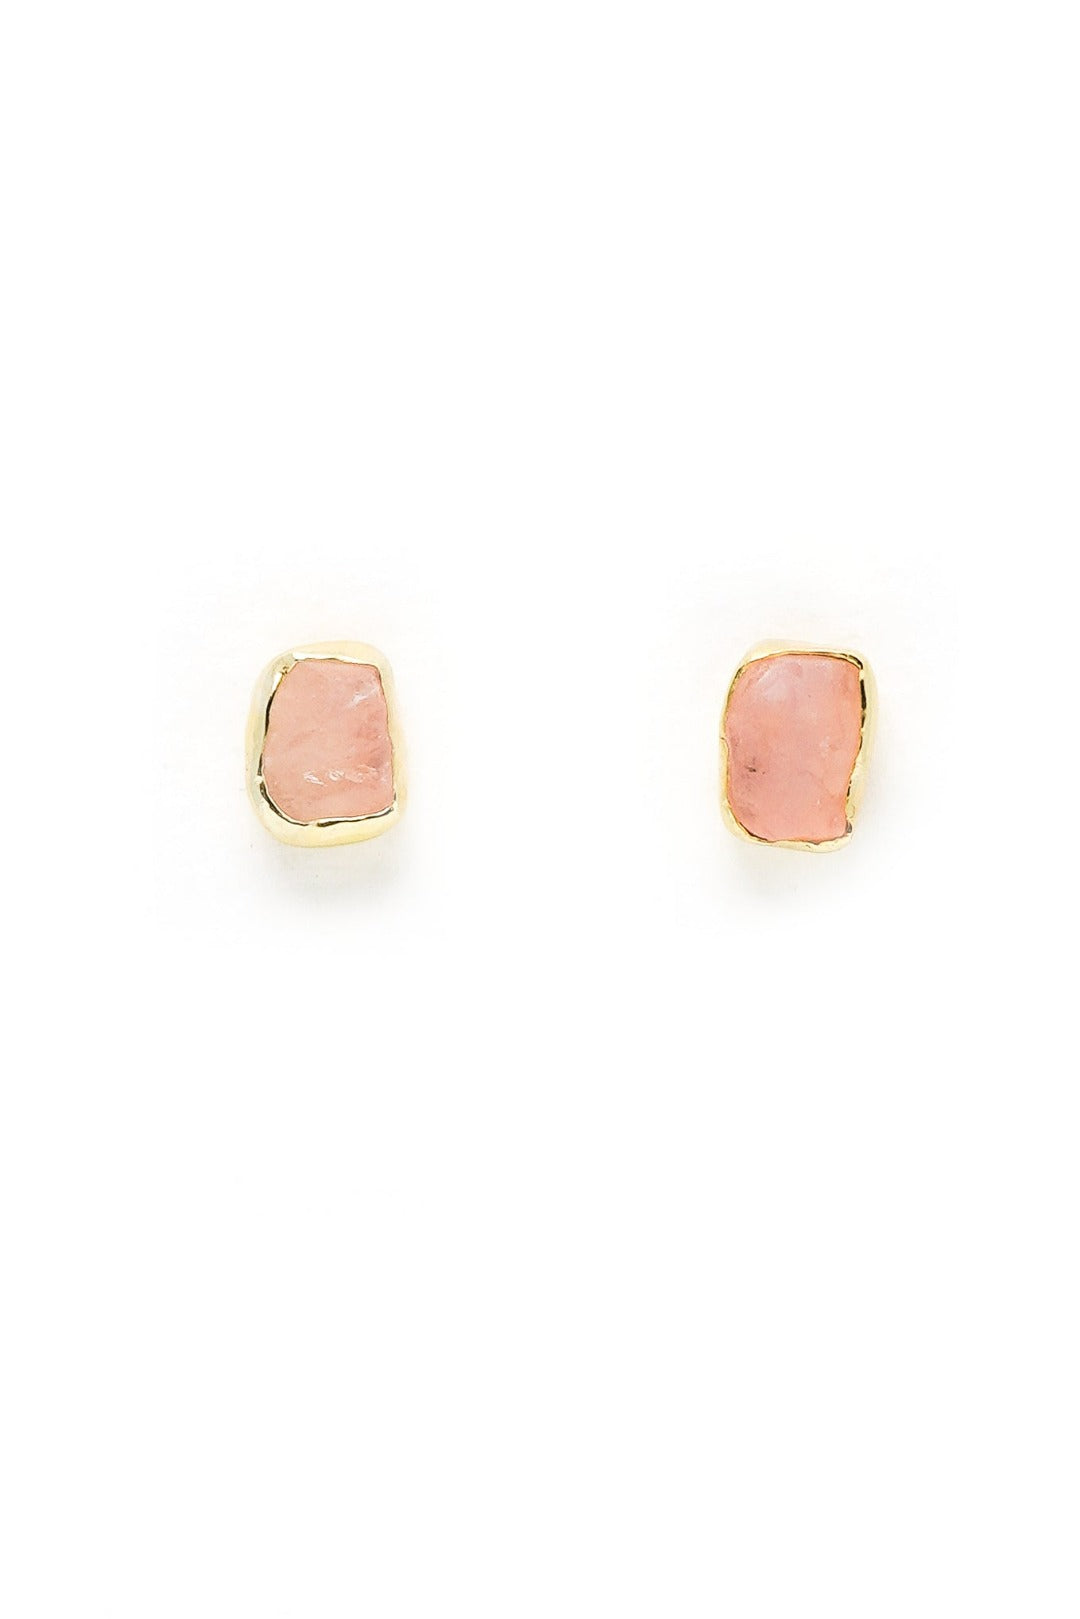 Gold Plated Rough Rose Quartz Small Stud Earrings